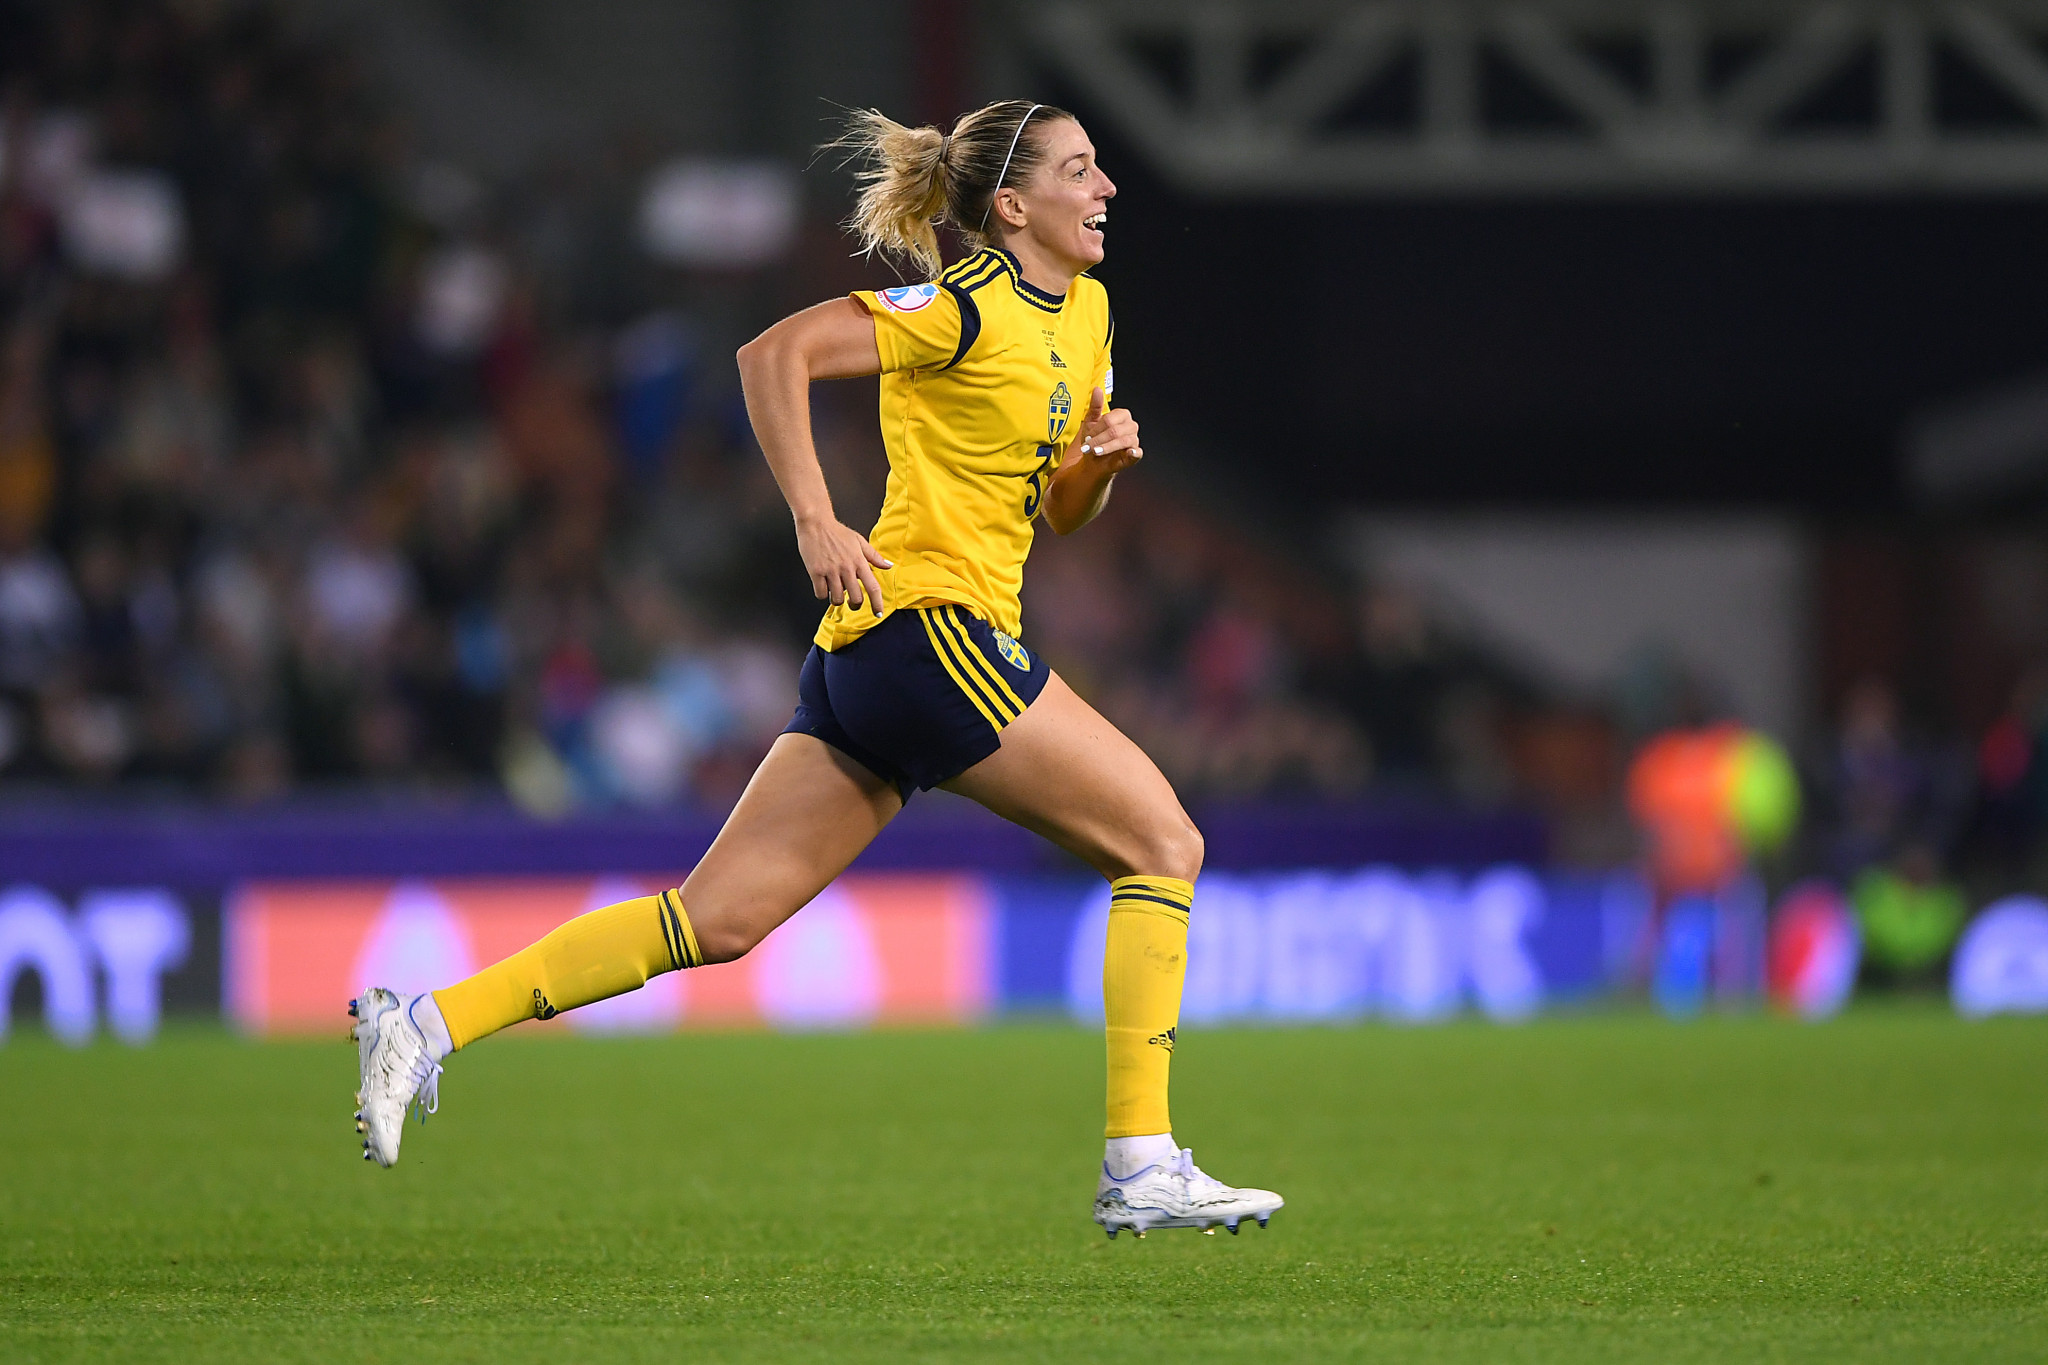 Linda Sembrant scored a stoppage time winner to send Sweden into the last four of the UEFA Women's Euro 2022 ©Getty Images